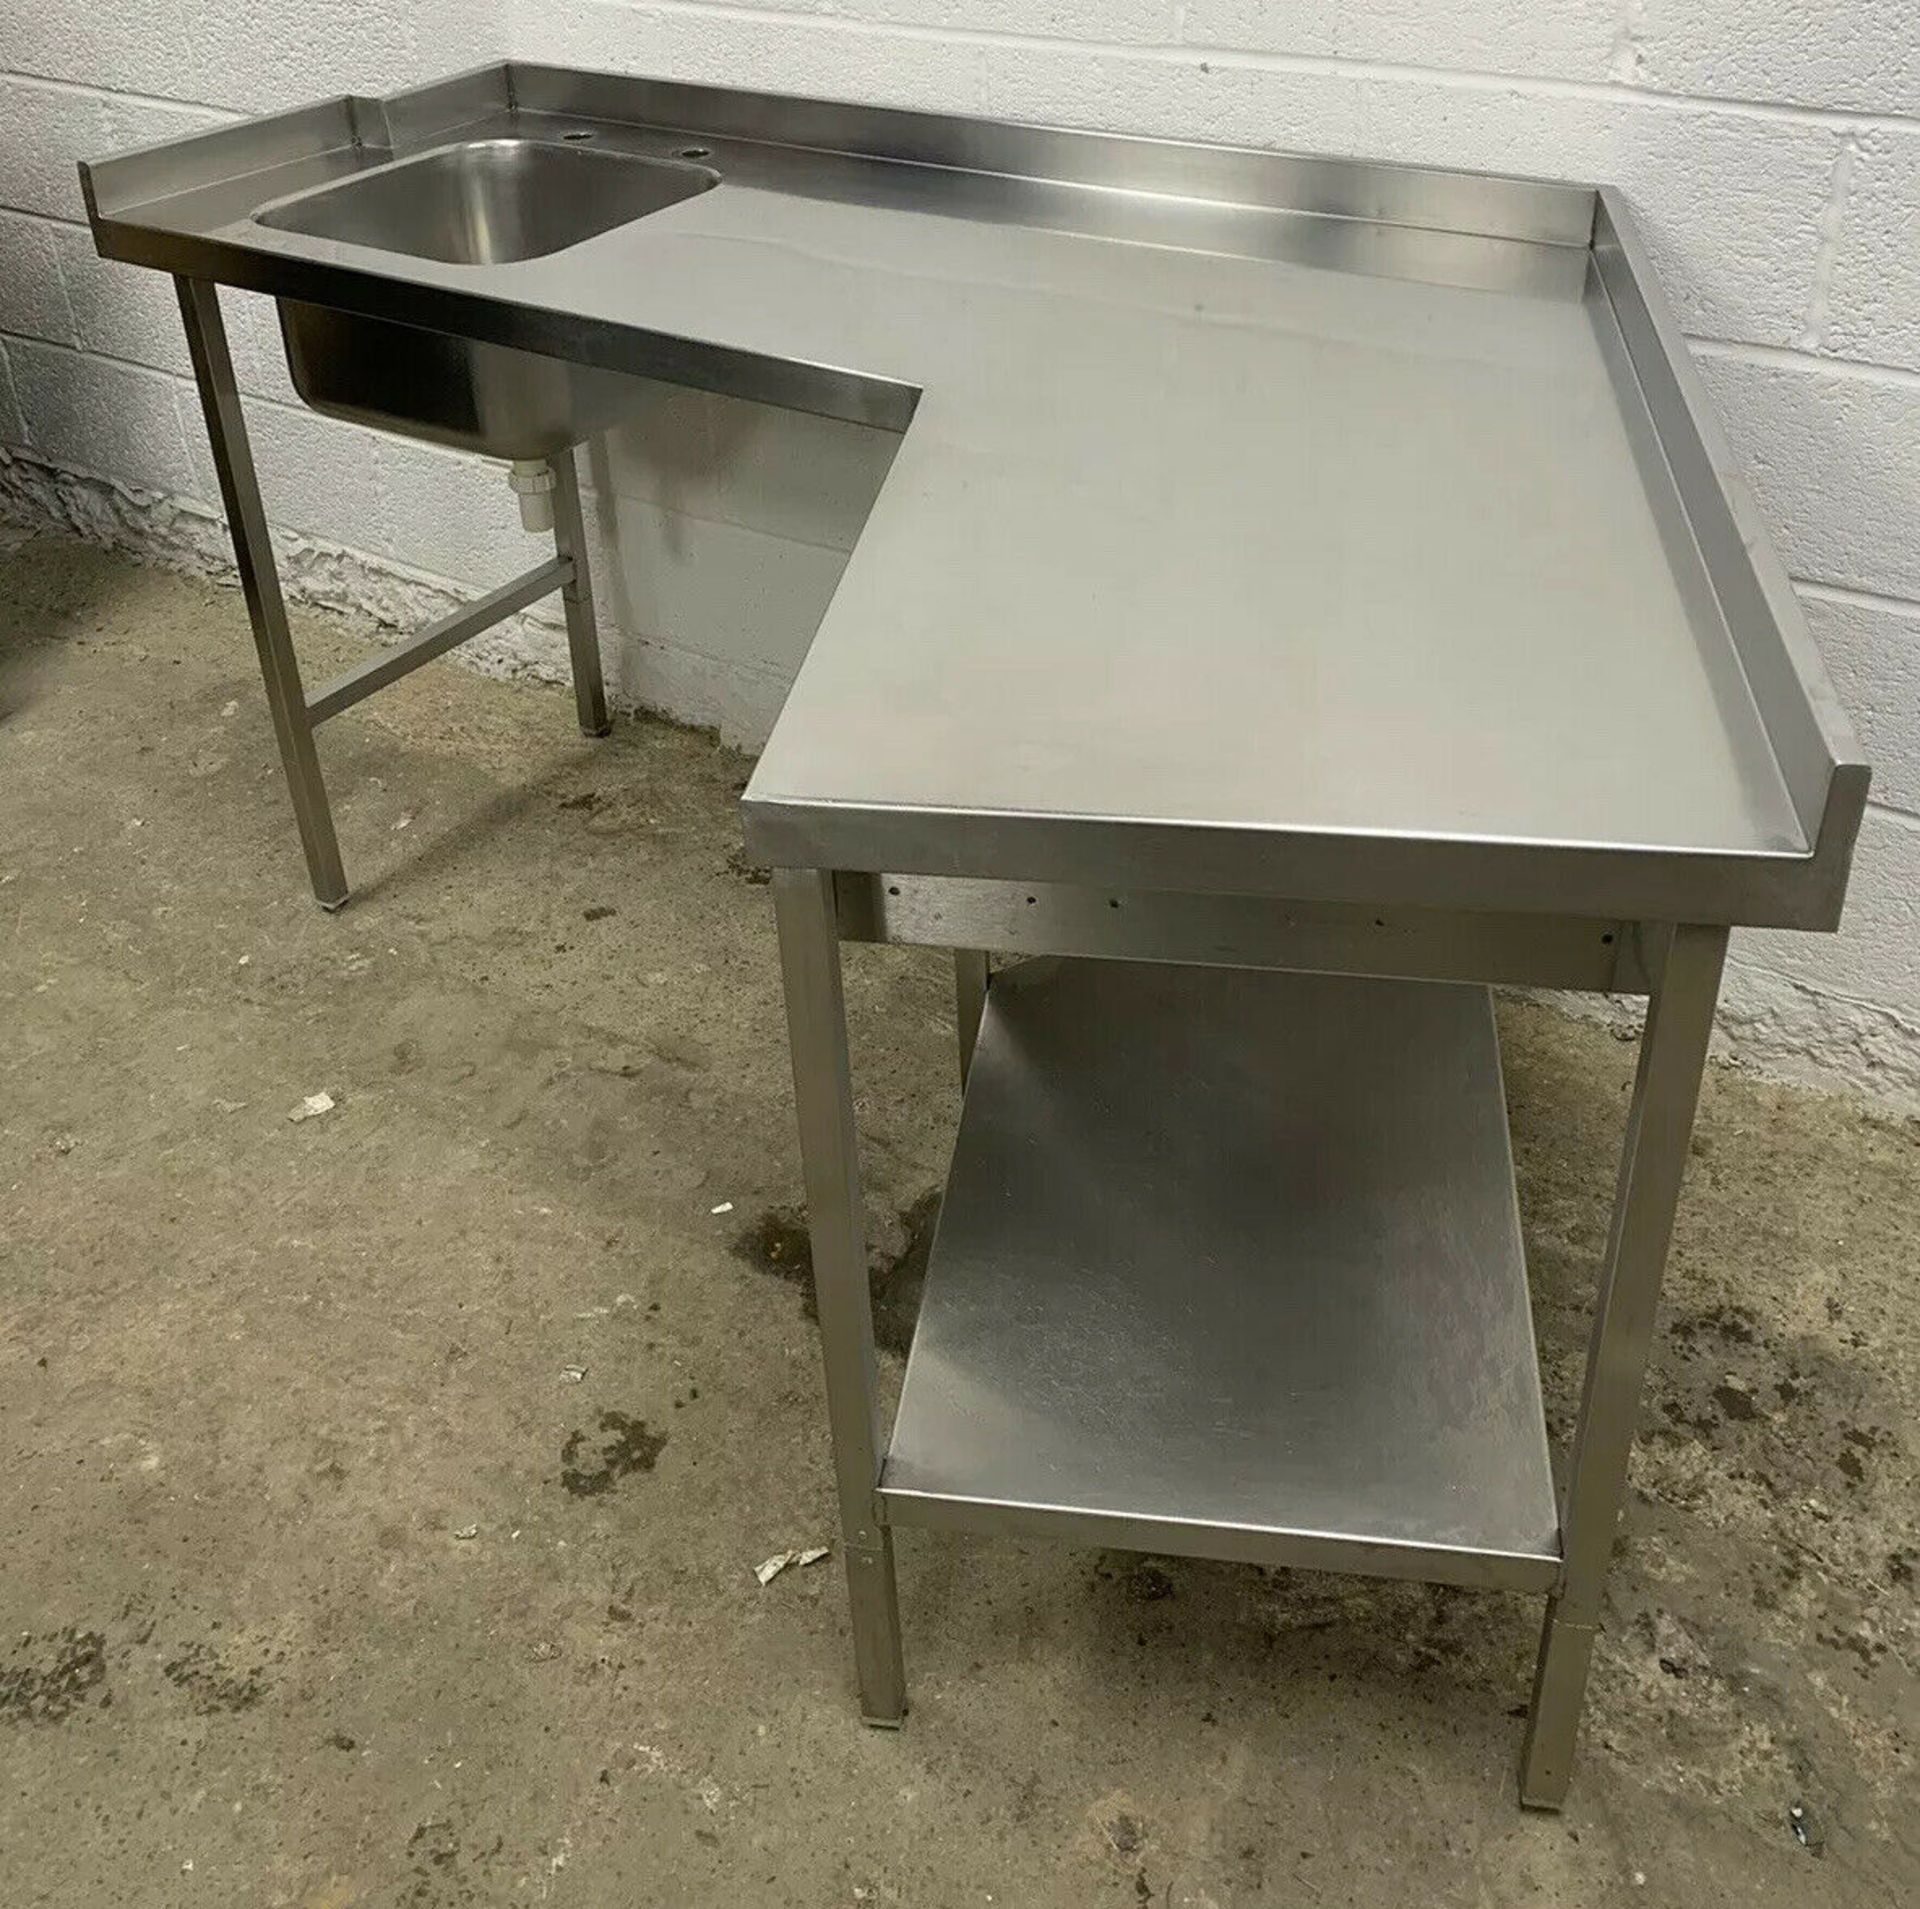 Stainless Steel Single Bowl Sink and Preperation Table - Image 3 of 5